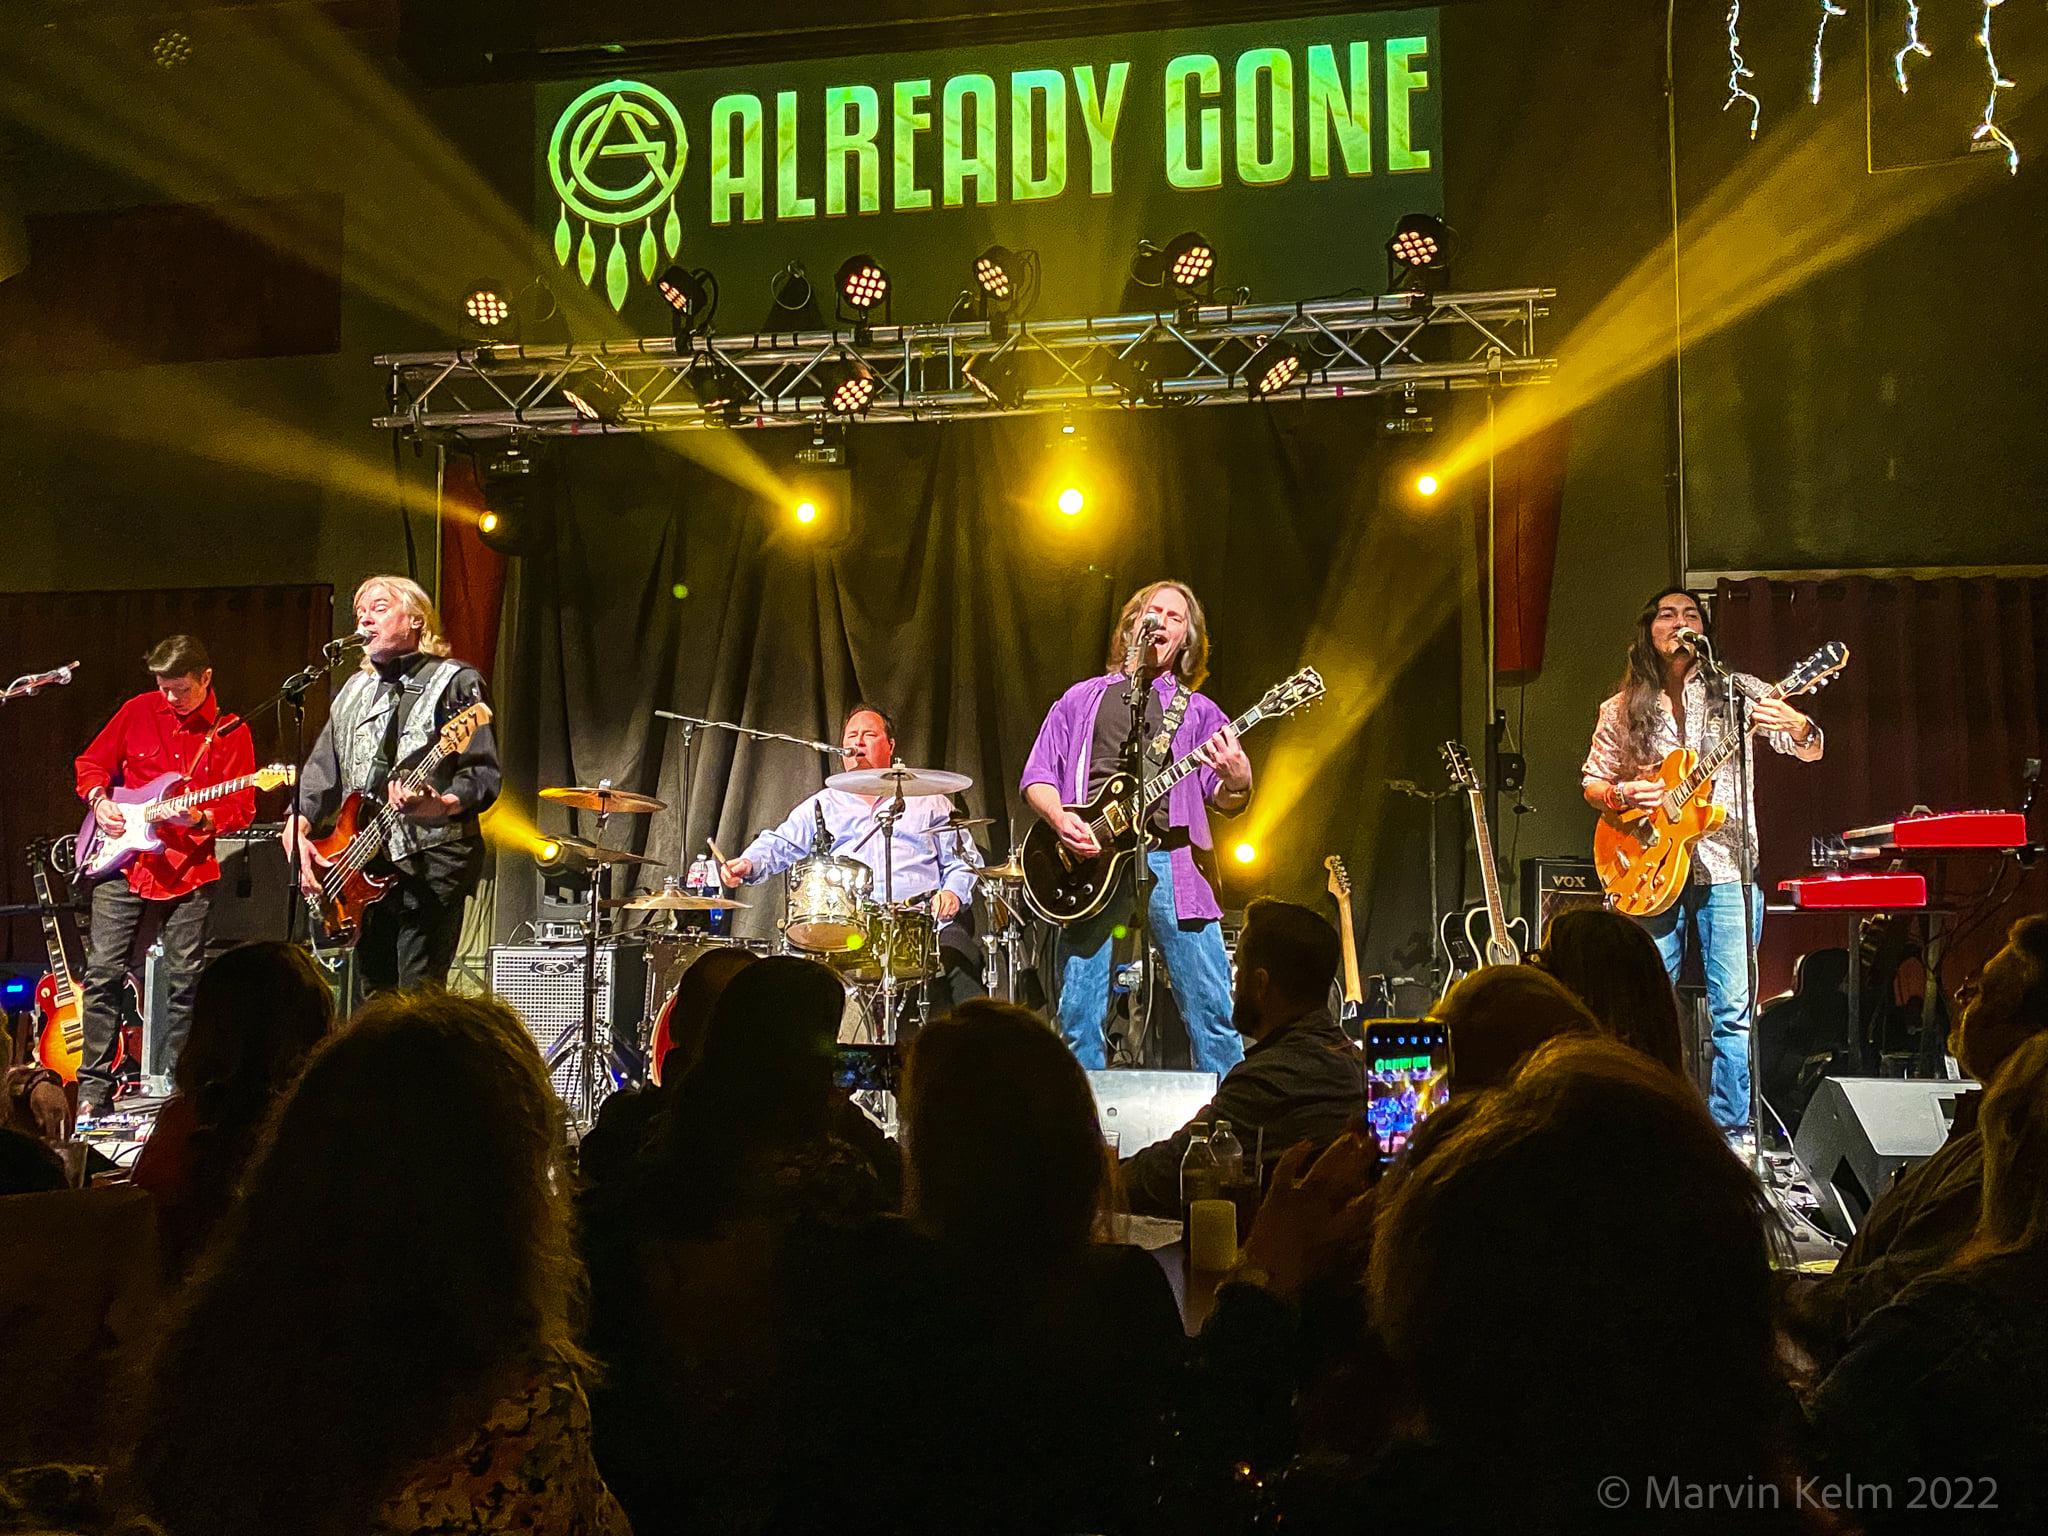 Already Gone at Old Town Theatre